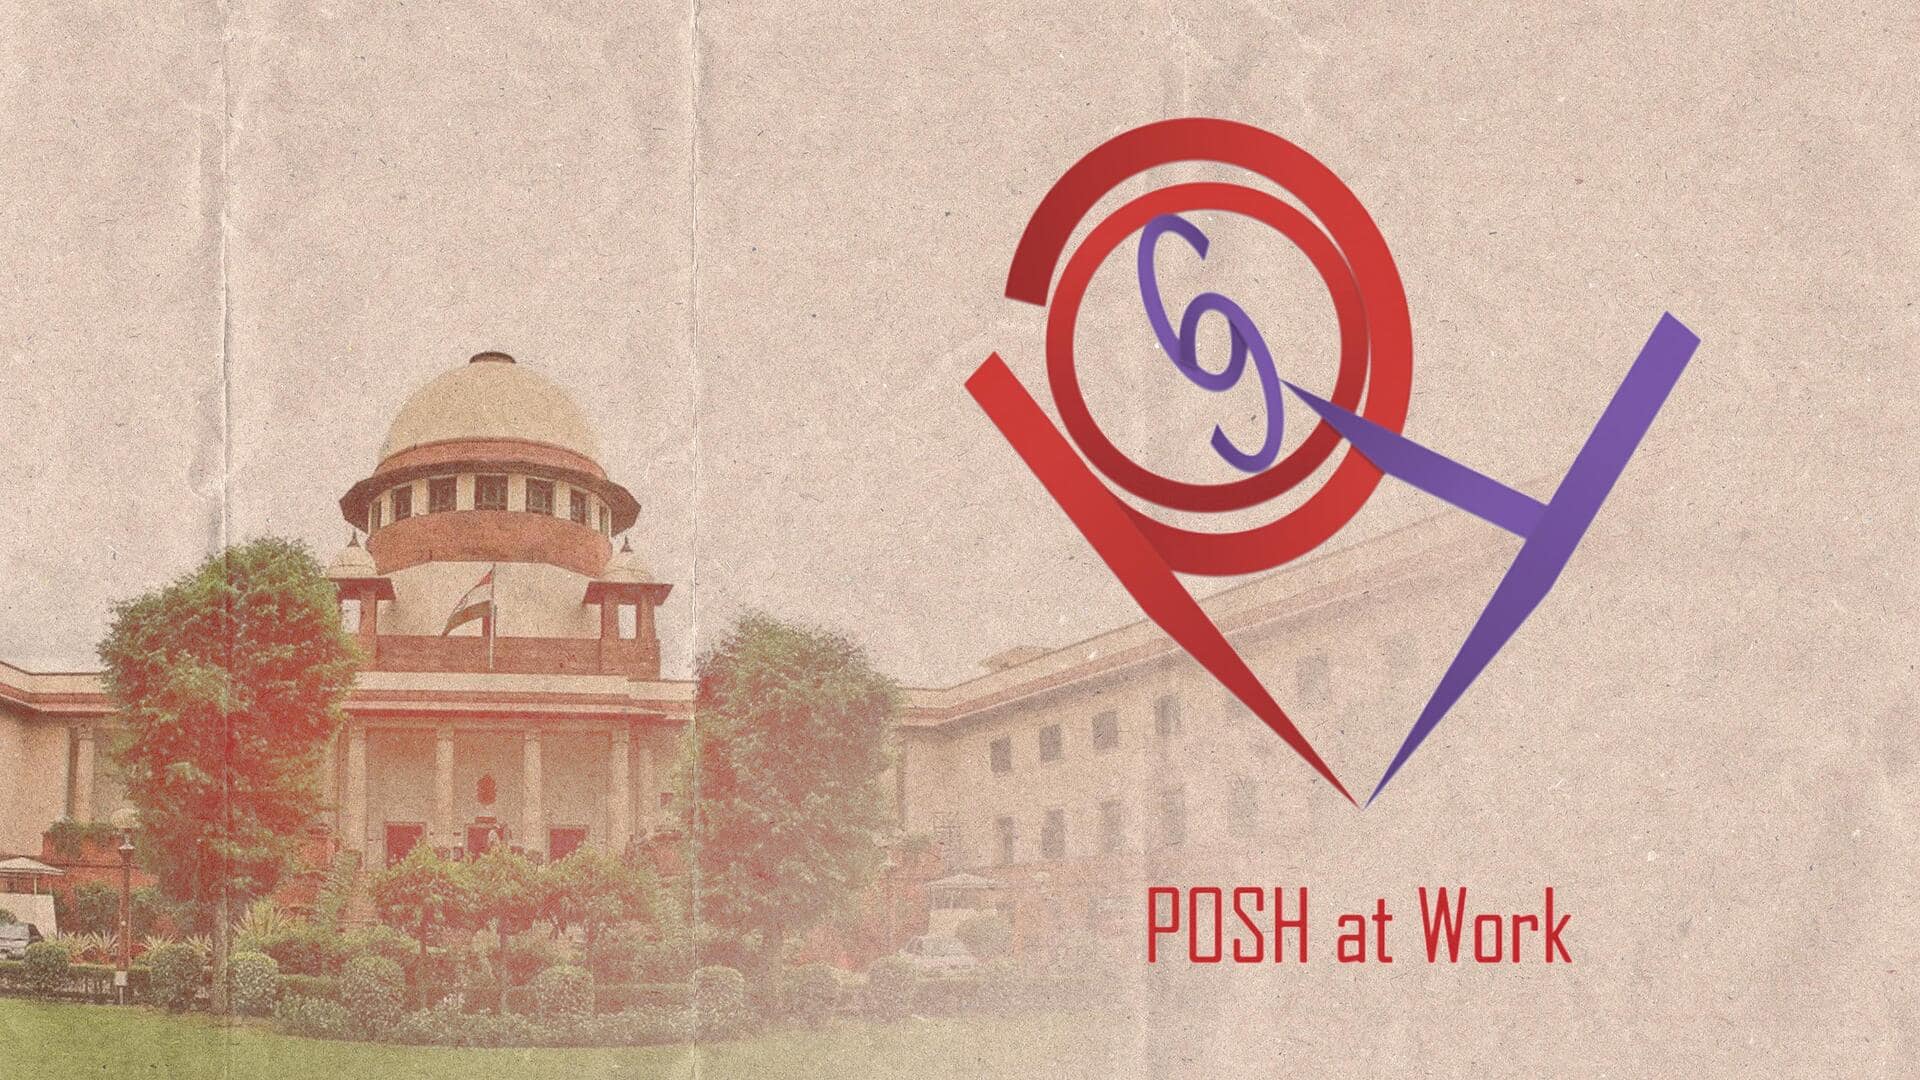 Sexual harassment at workplace: SC rejects PIL seeking complainants' protection